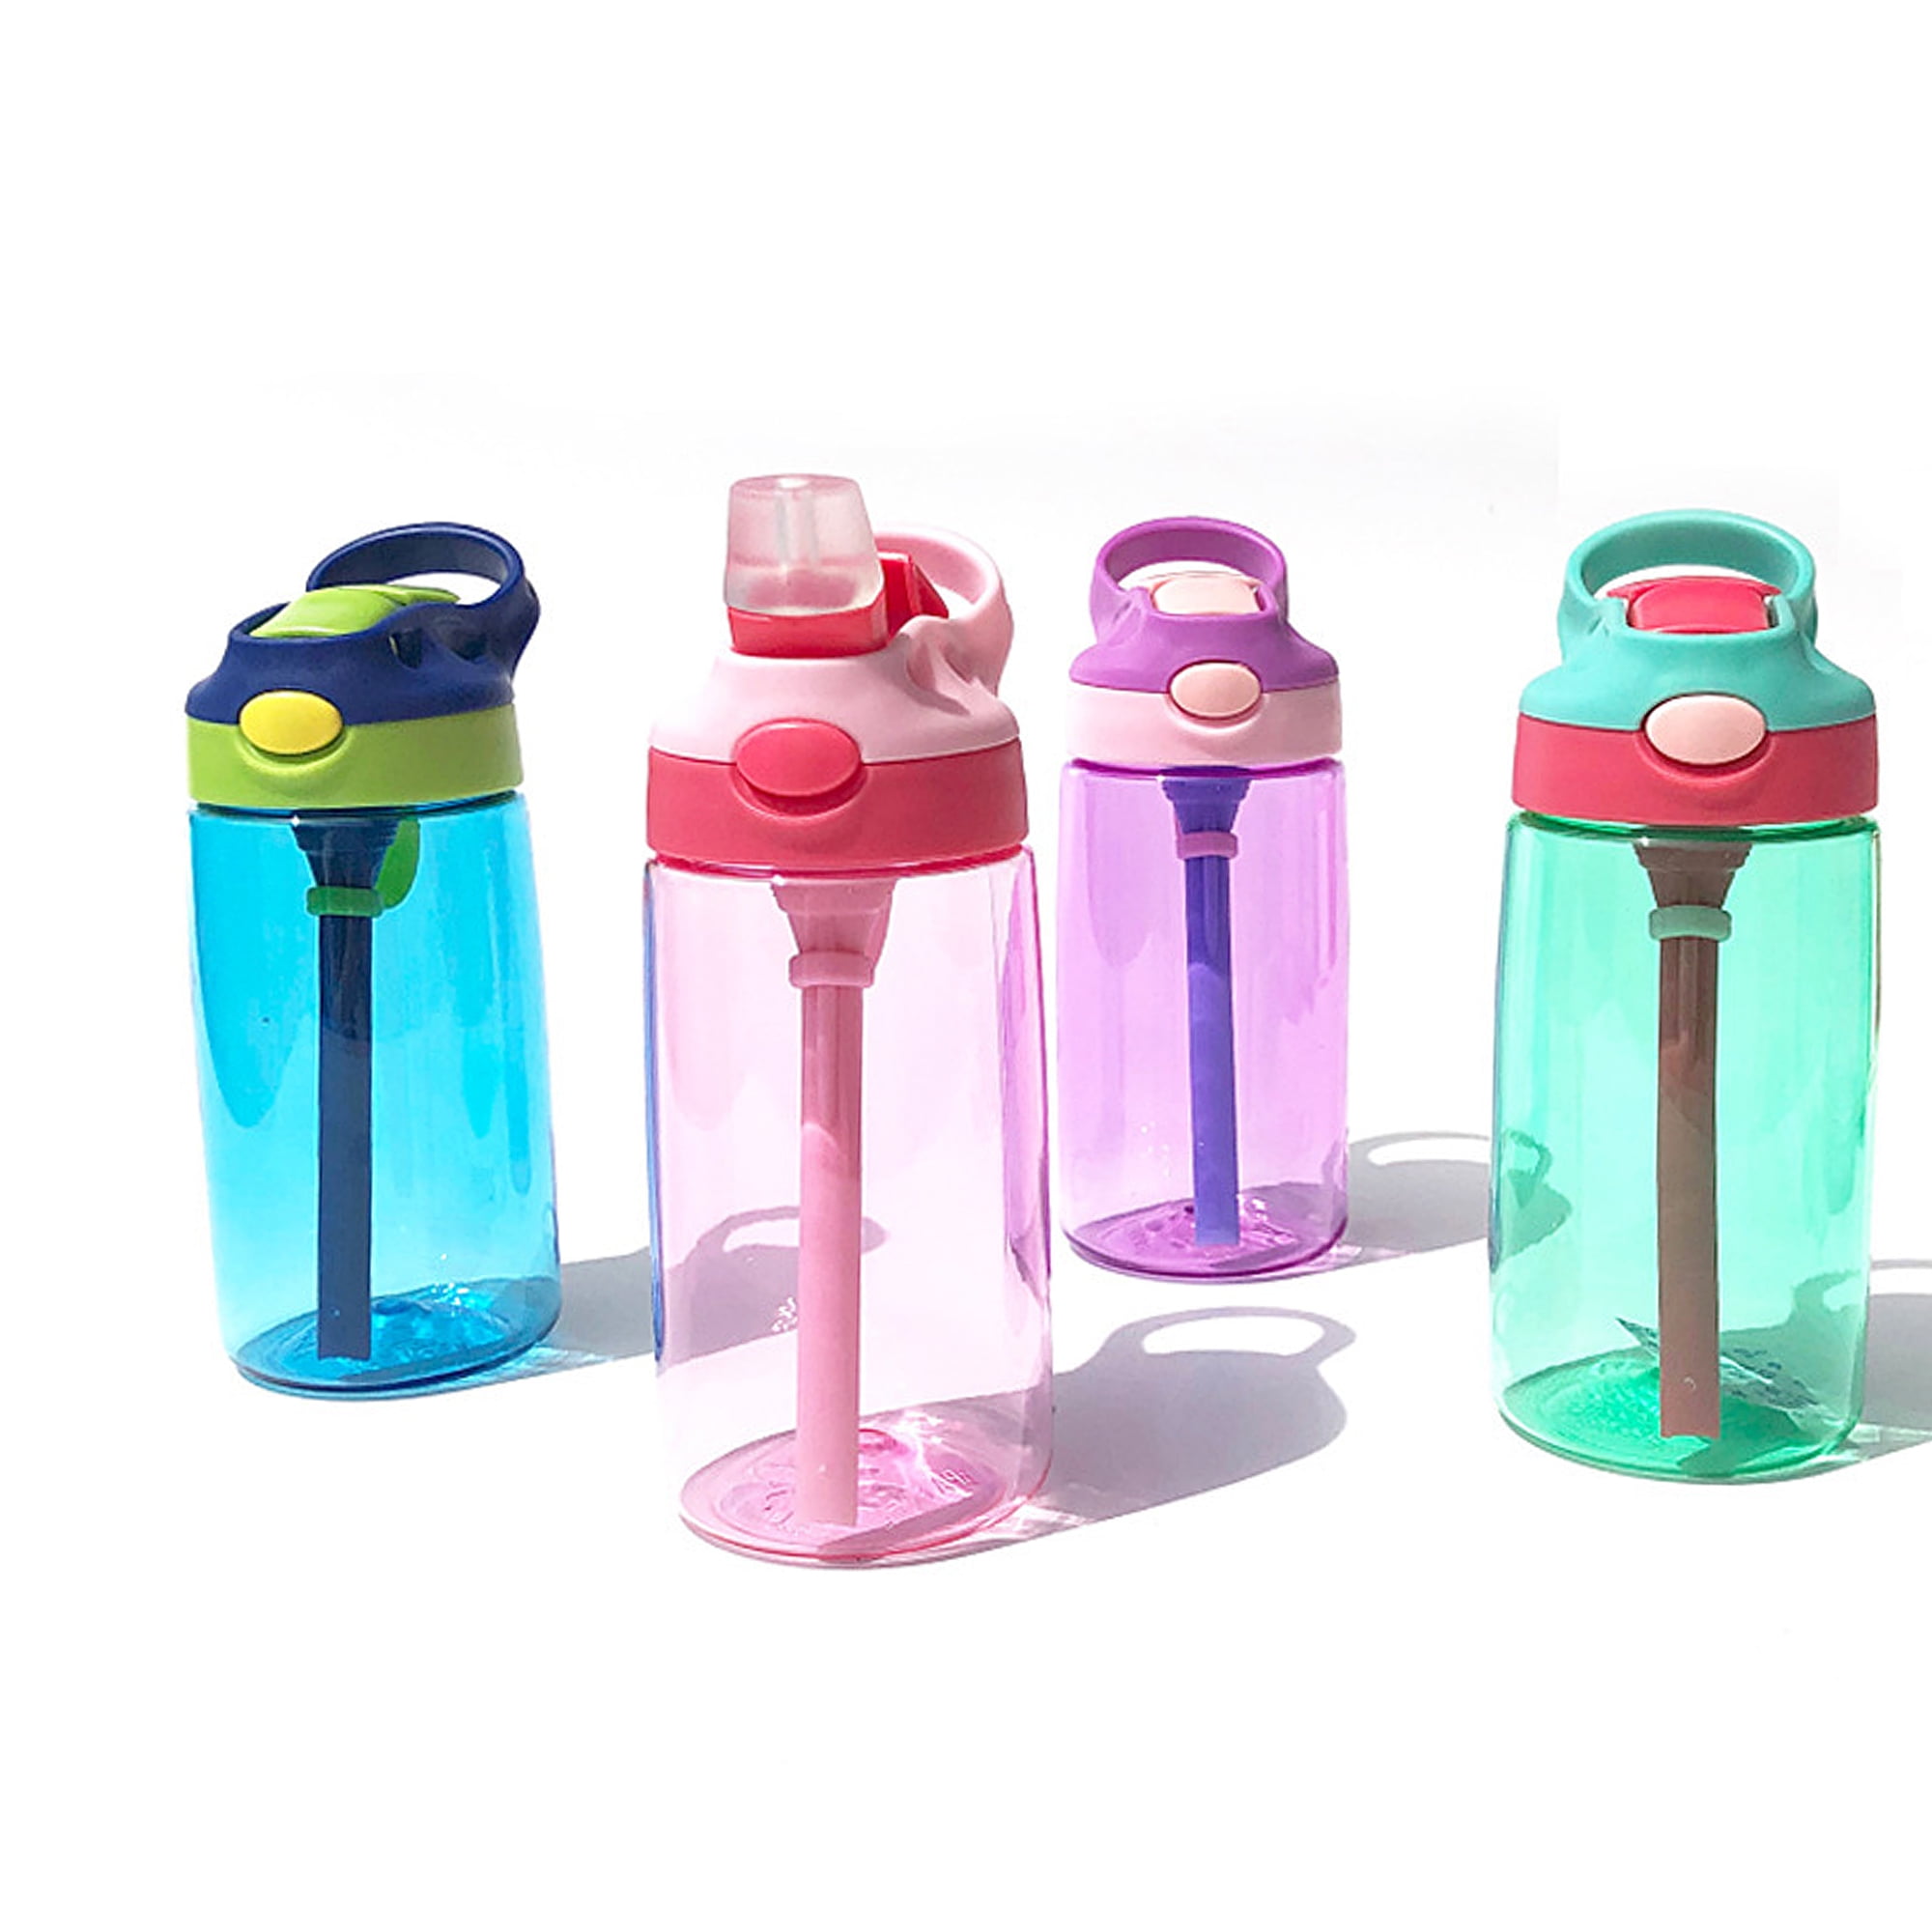 Kids Summer Portable Water Jug with Strap School Pink Anti-Leak Design Creative Drinking Bottels for Travel Bule Cute Camera Shape Water Bottles with Straws